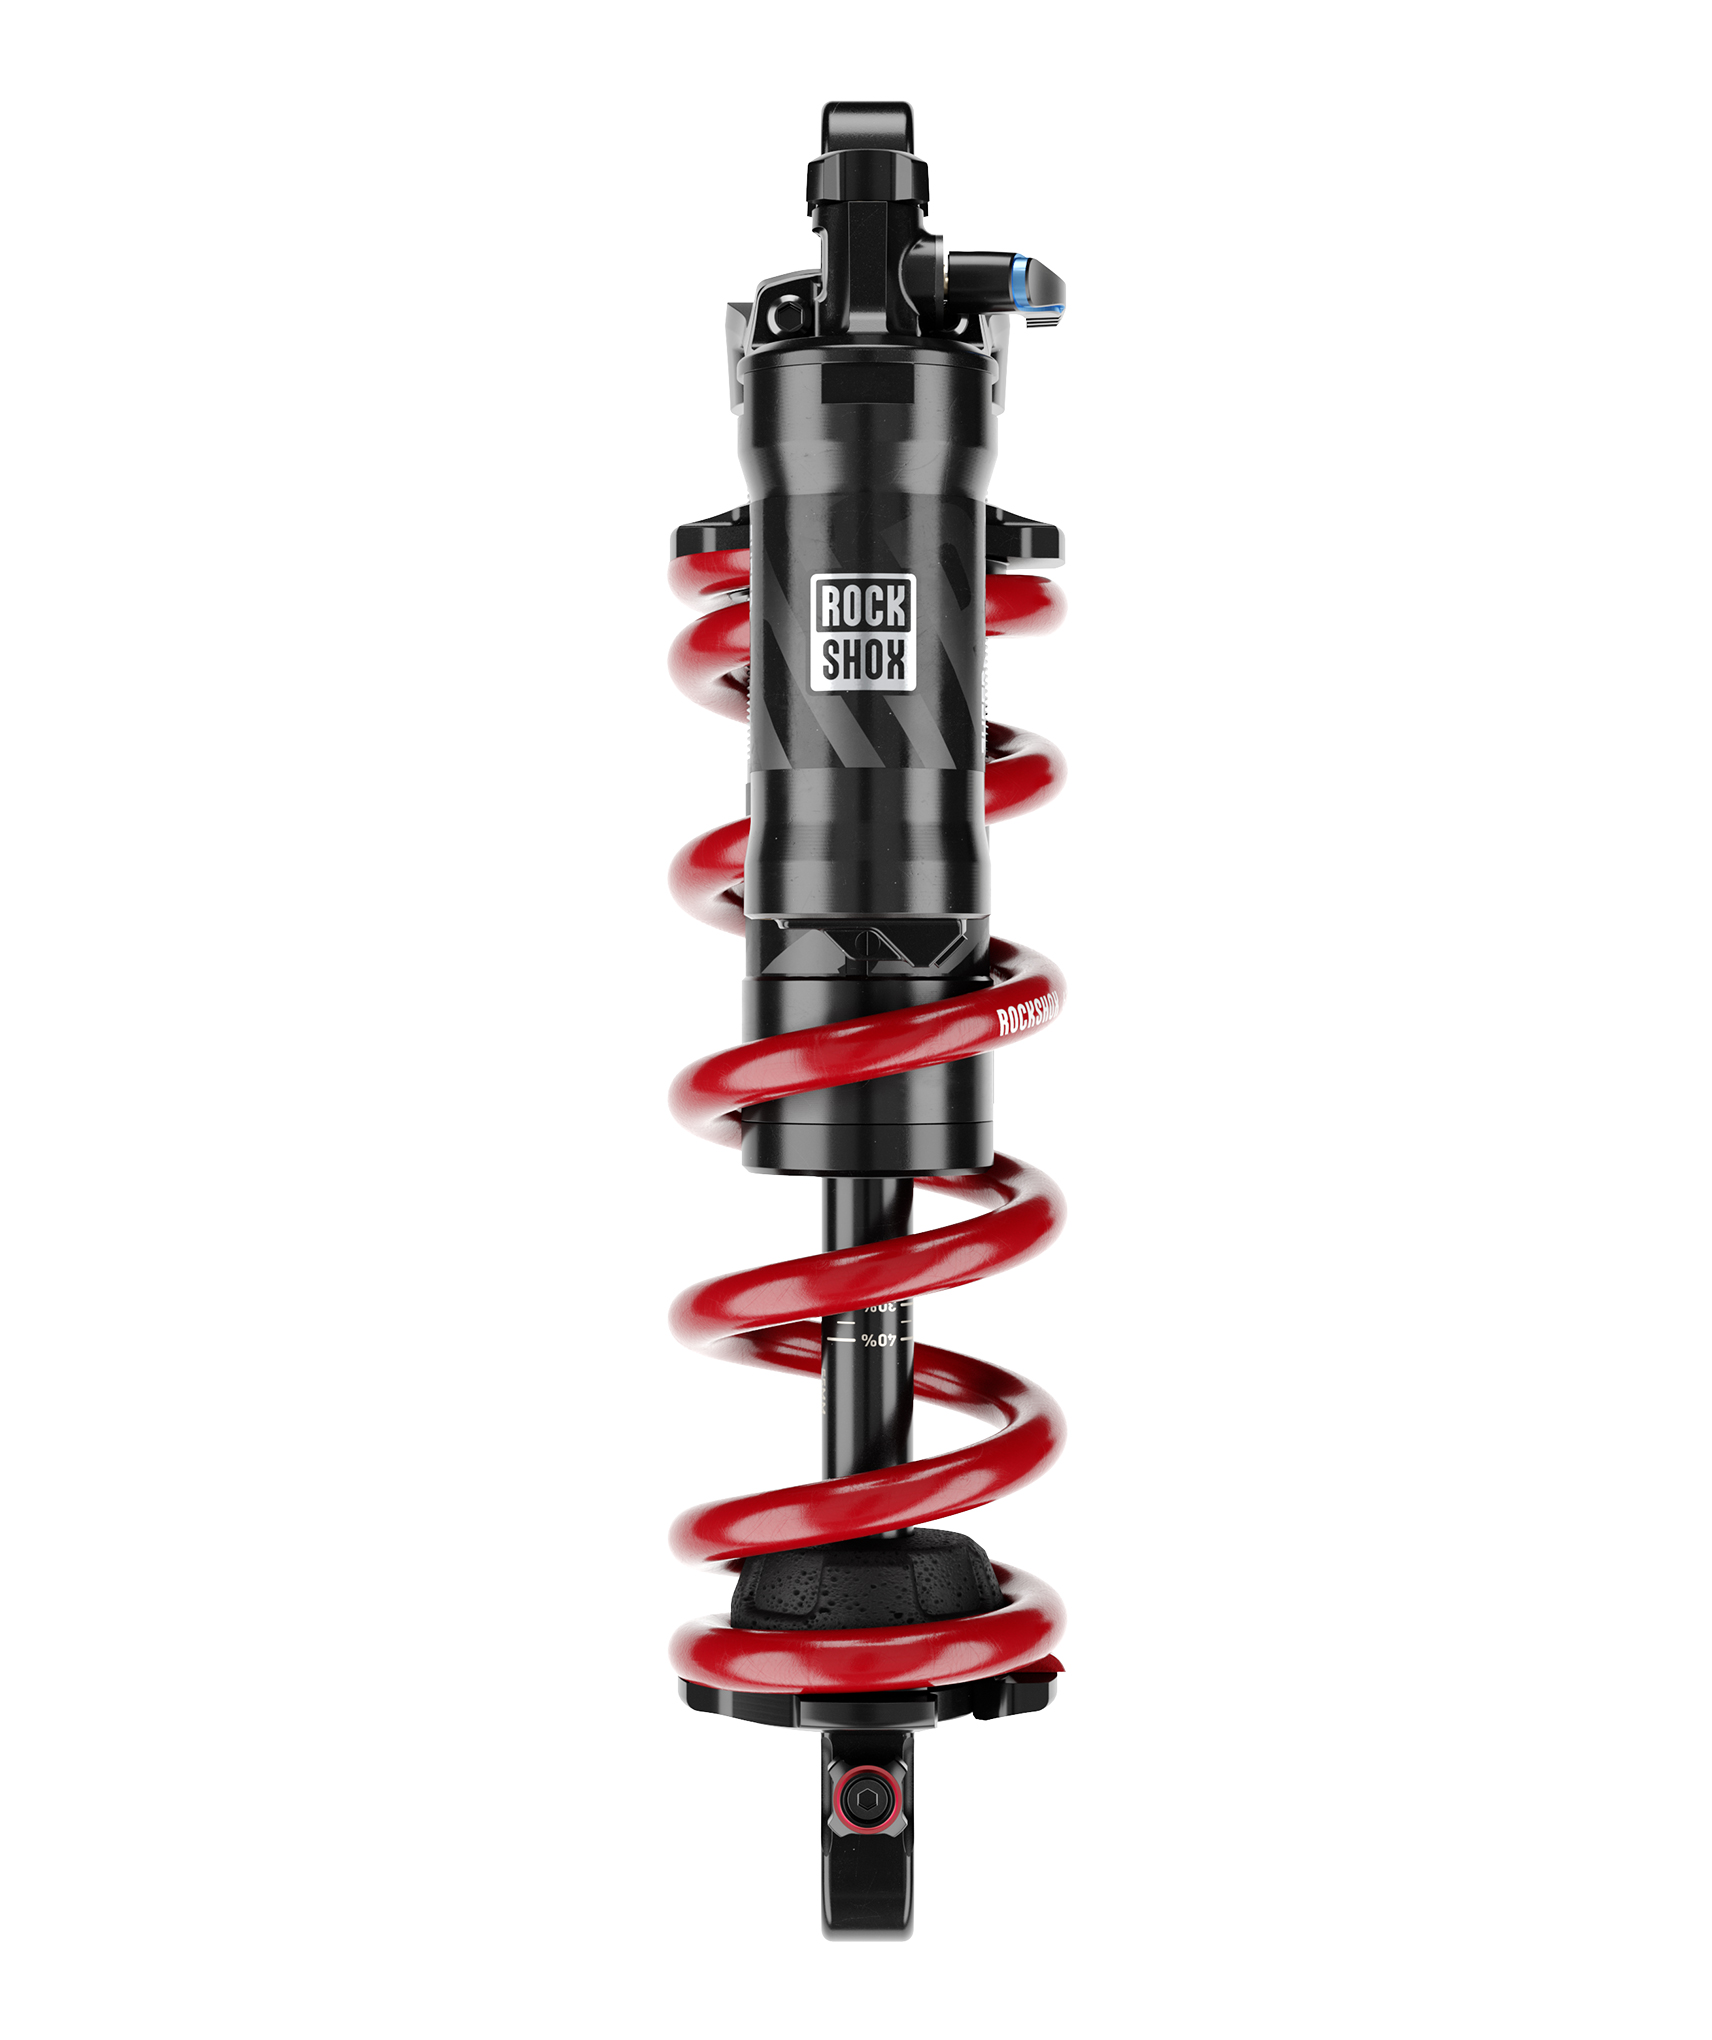 Rockshox Super Deluxe Coil Spring Weight Chart